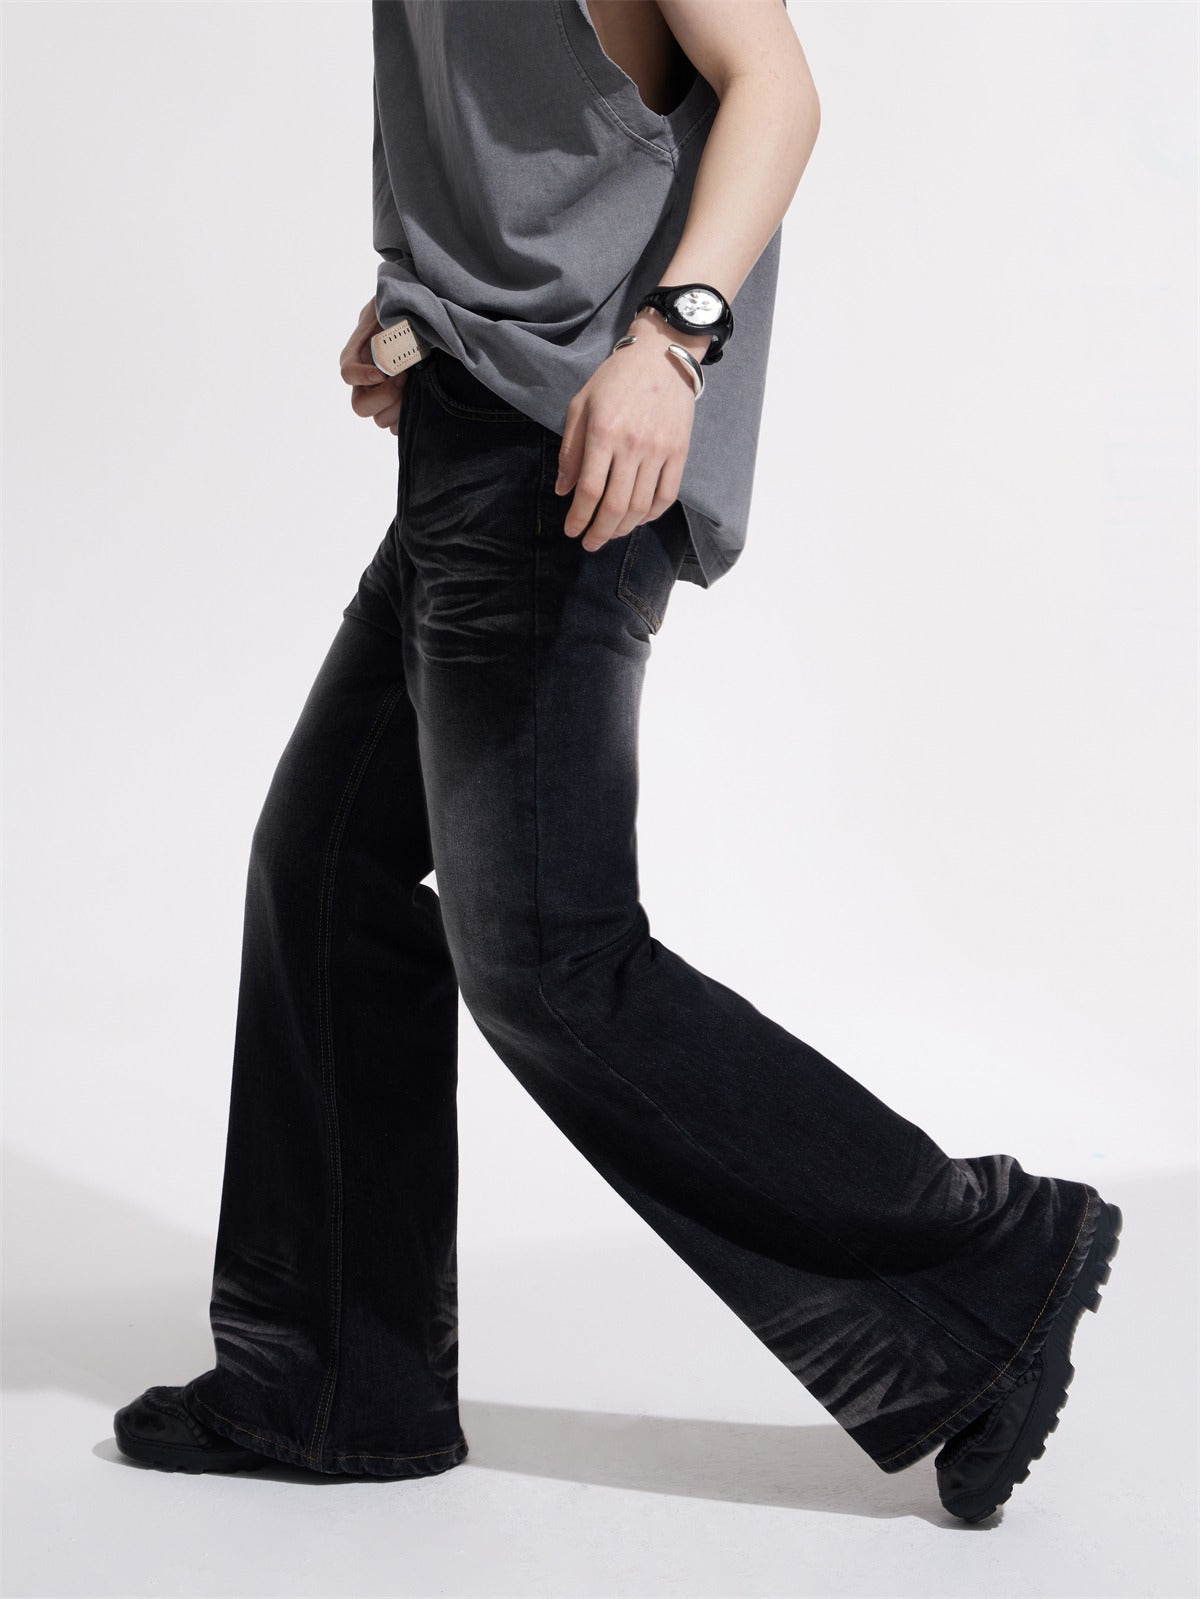 Slimming slightly flared jeans pants